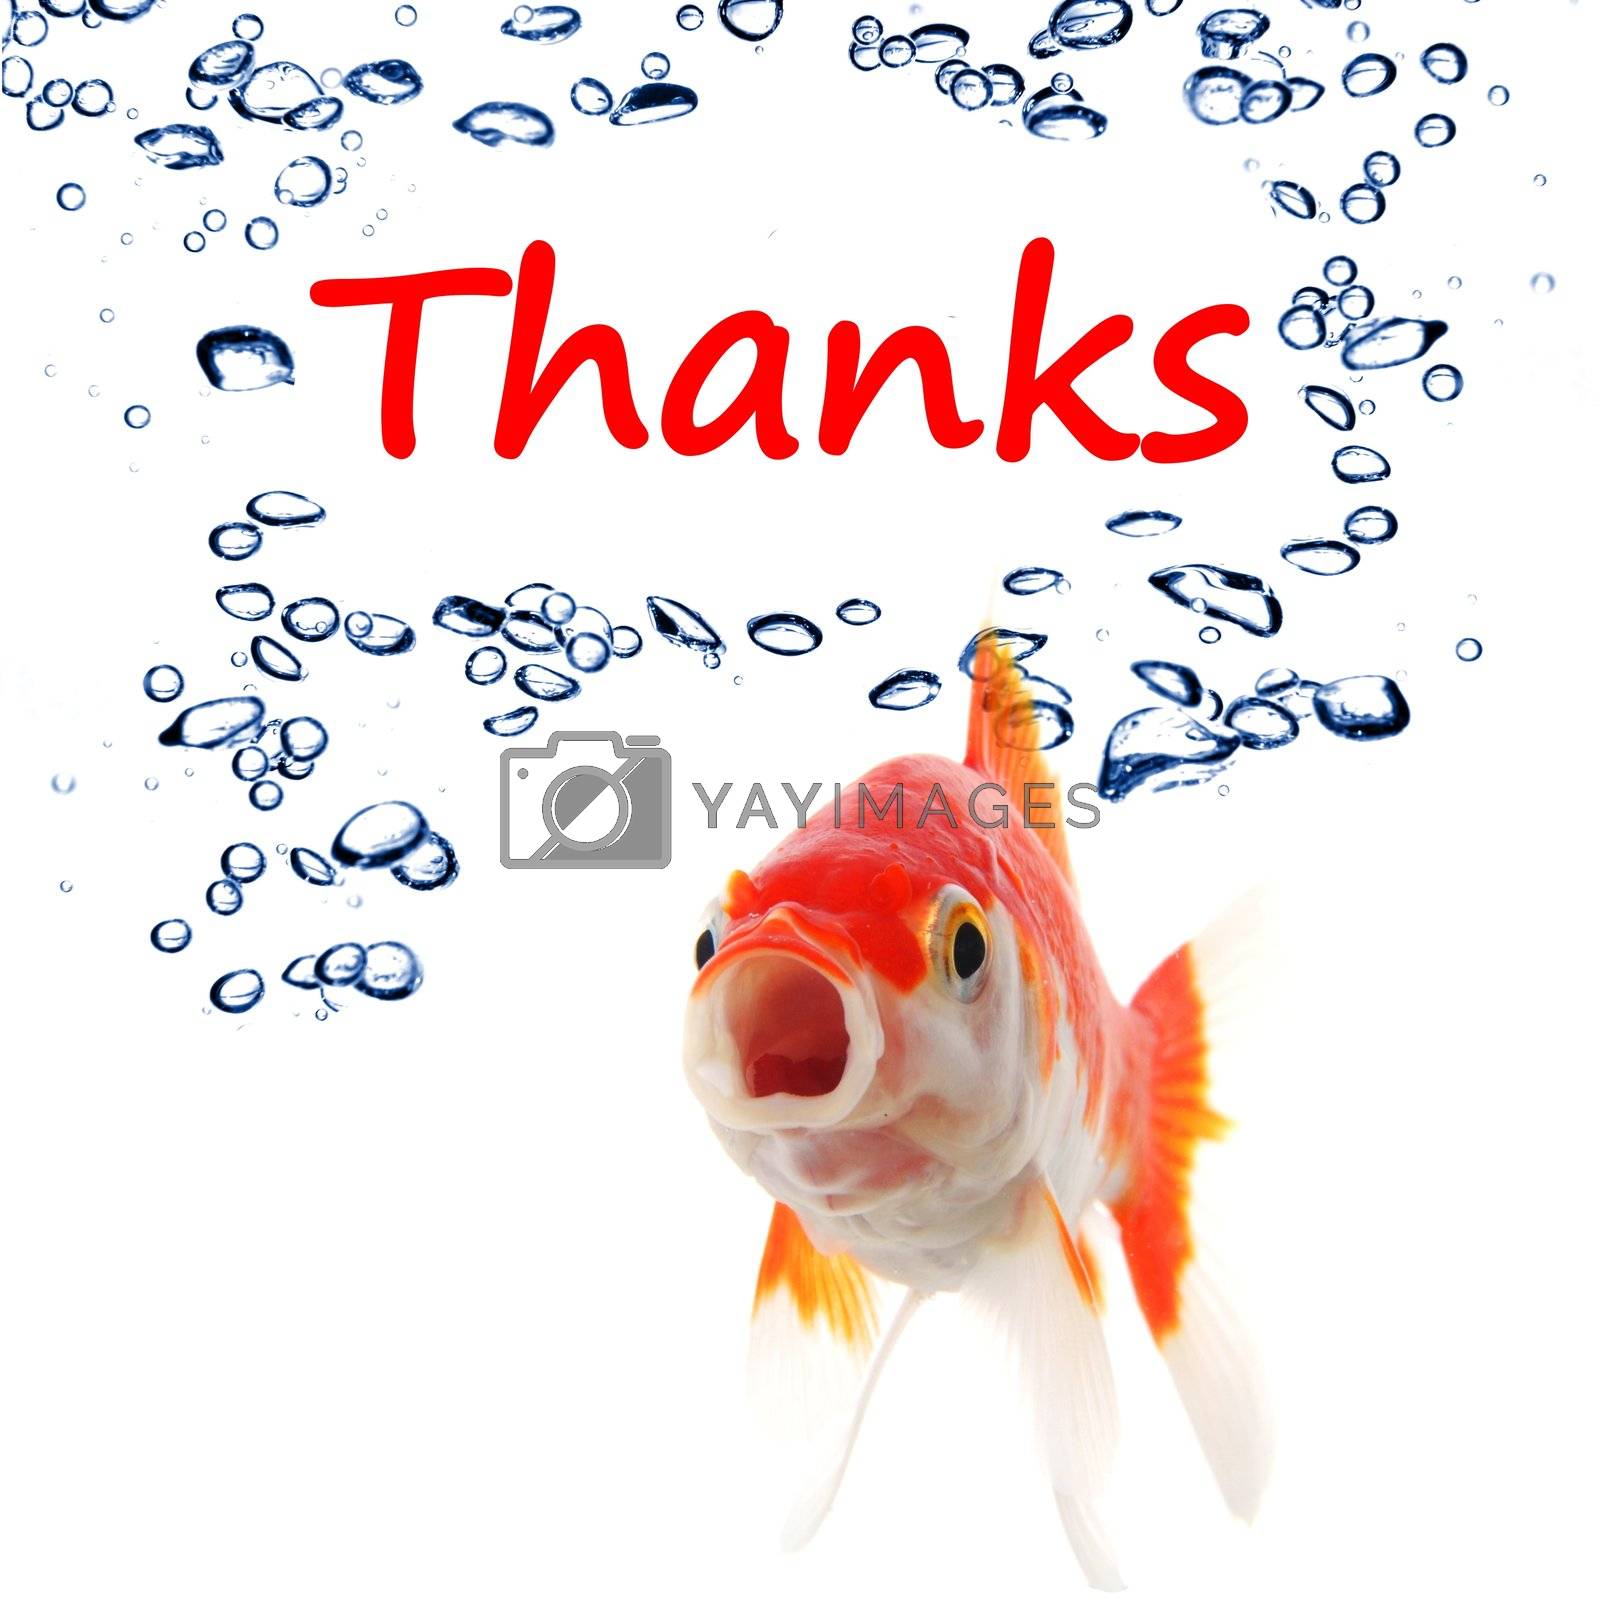 Royalty free image of thanks by gunnar3000